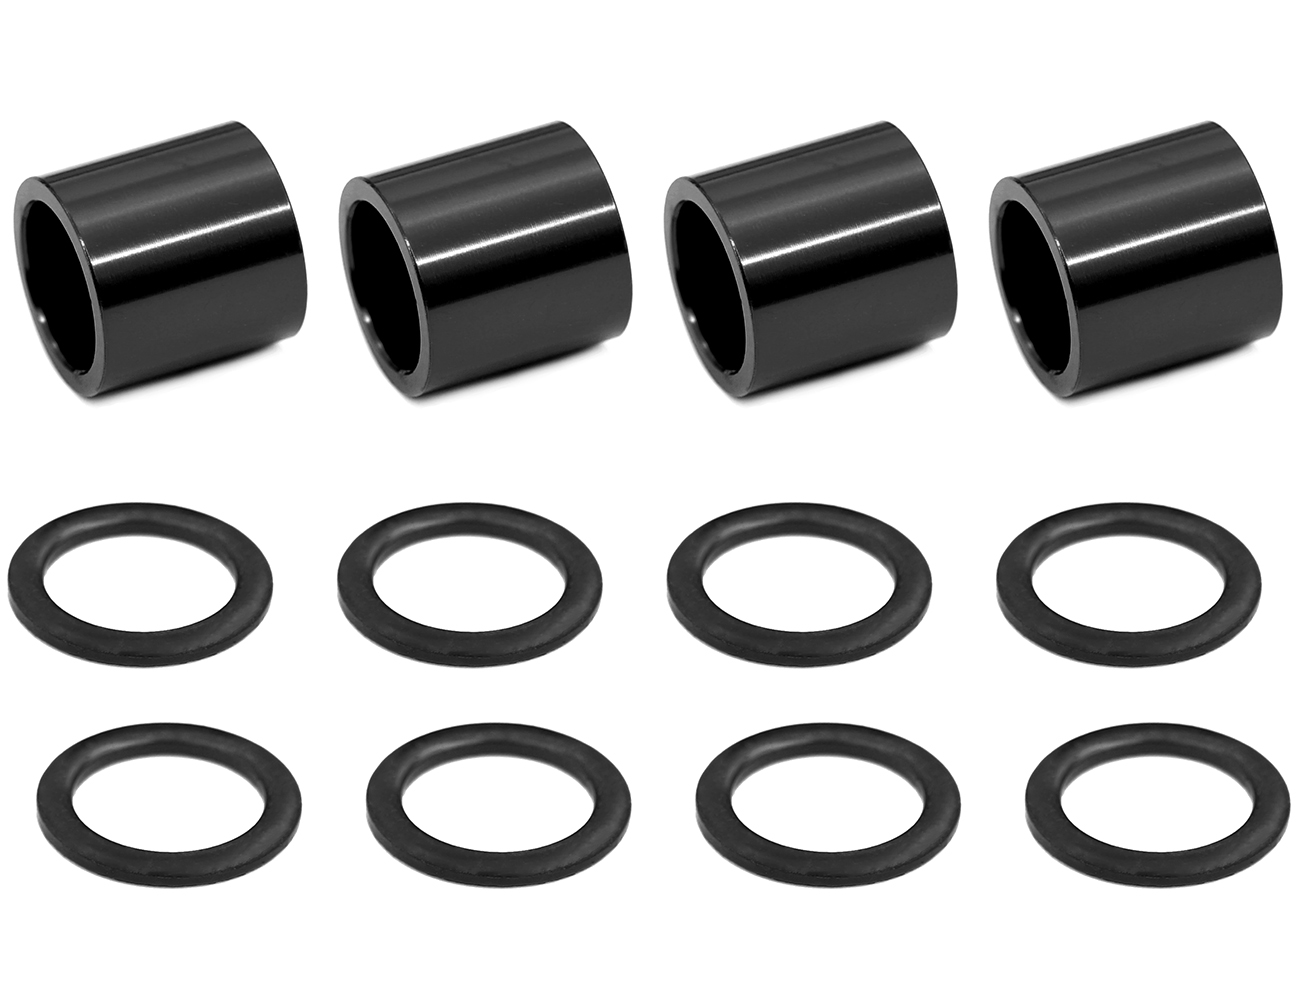 Colored Bearing Spacers and Washers Lightweight Speed Hardware Kit for Skateboards and Longboards 4 Spacers + 8 Washers